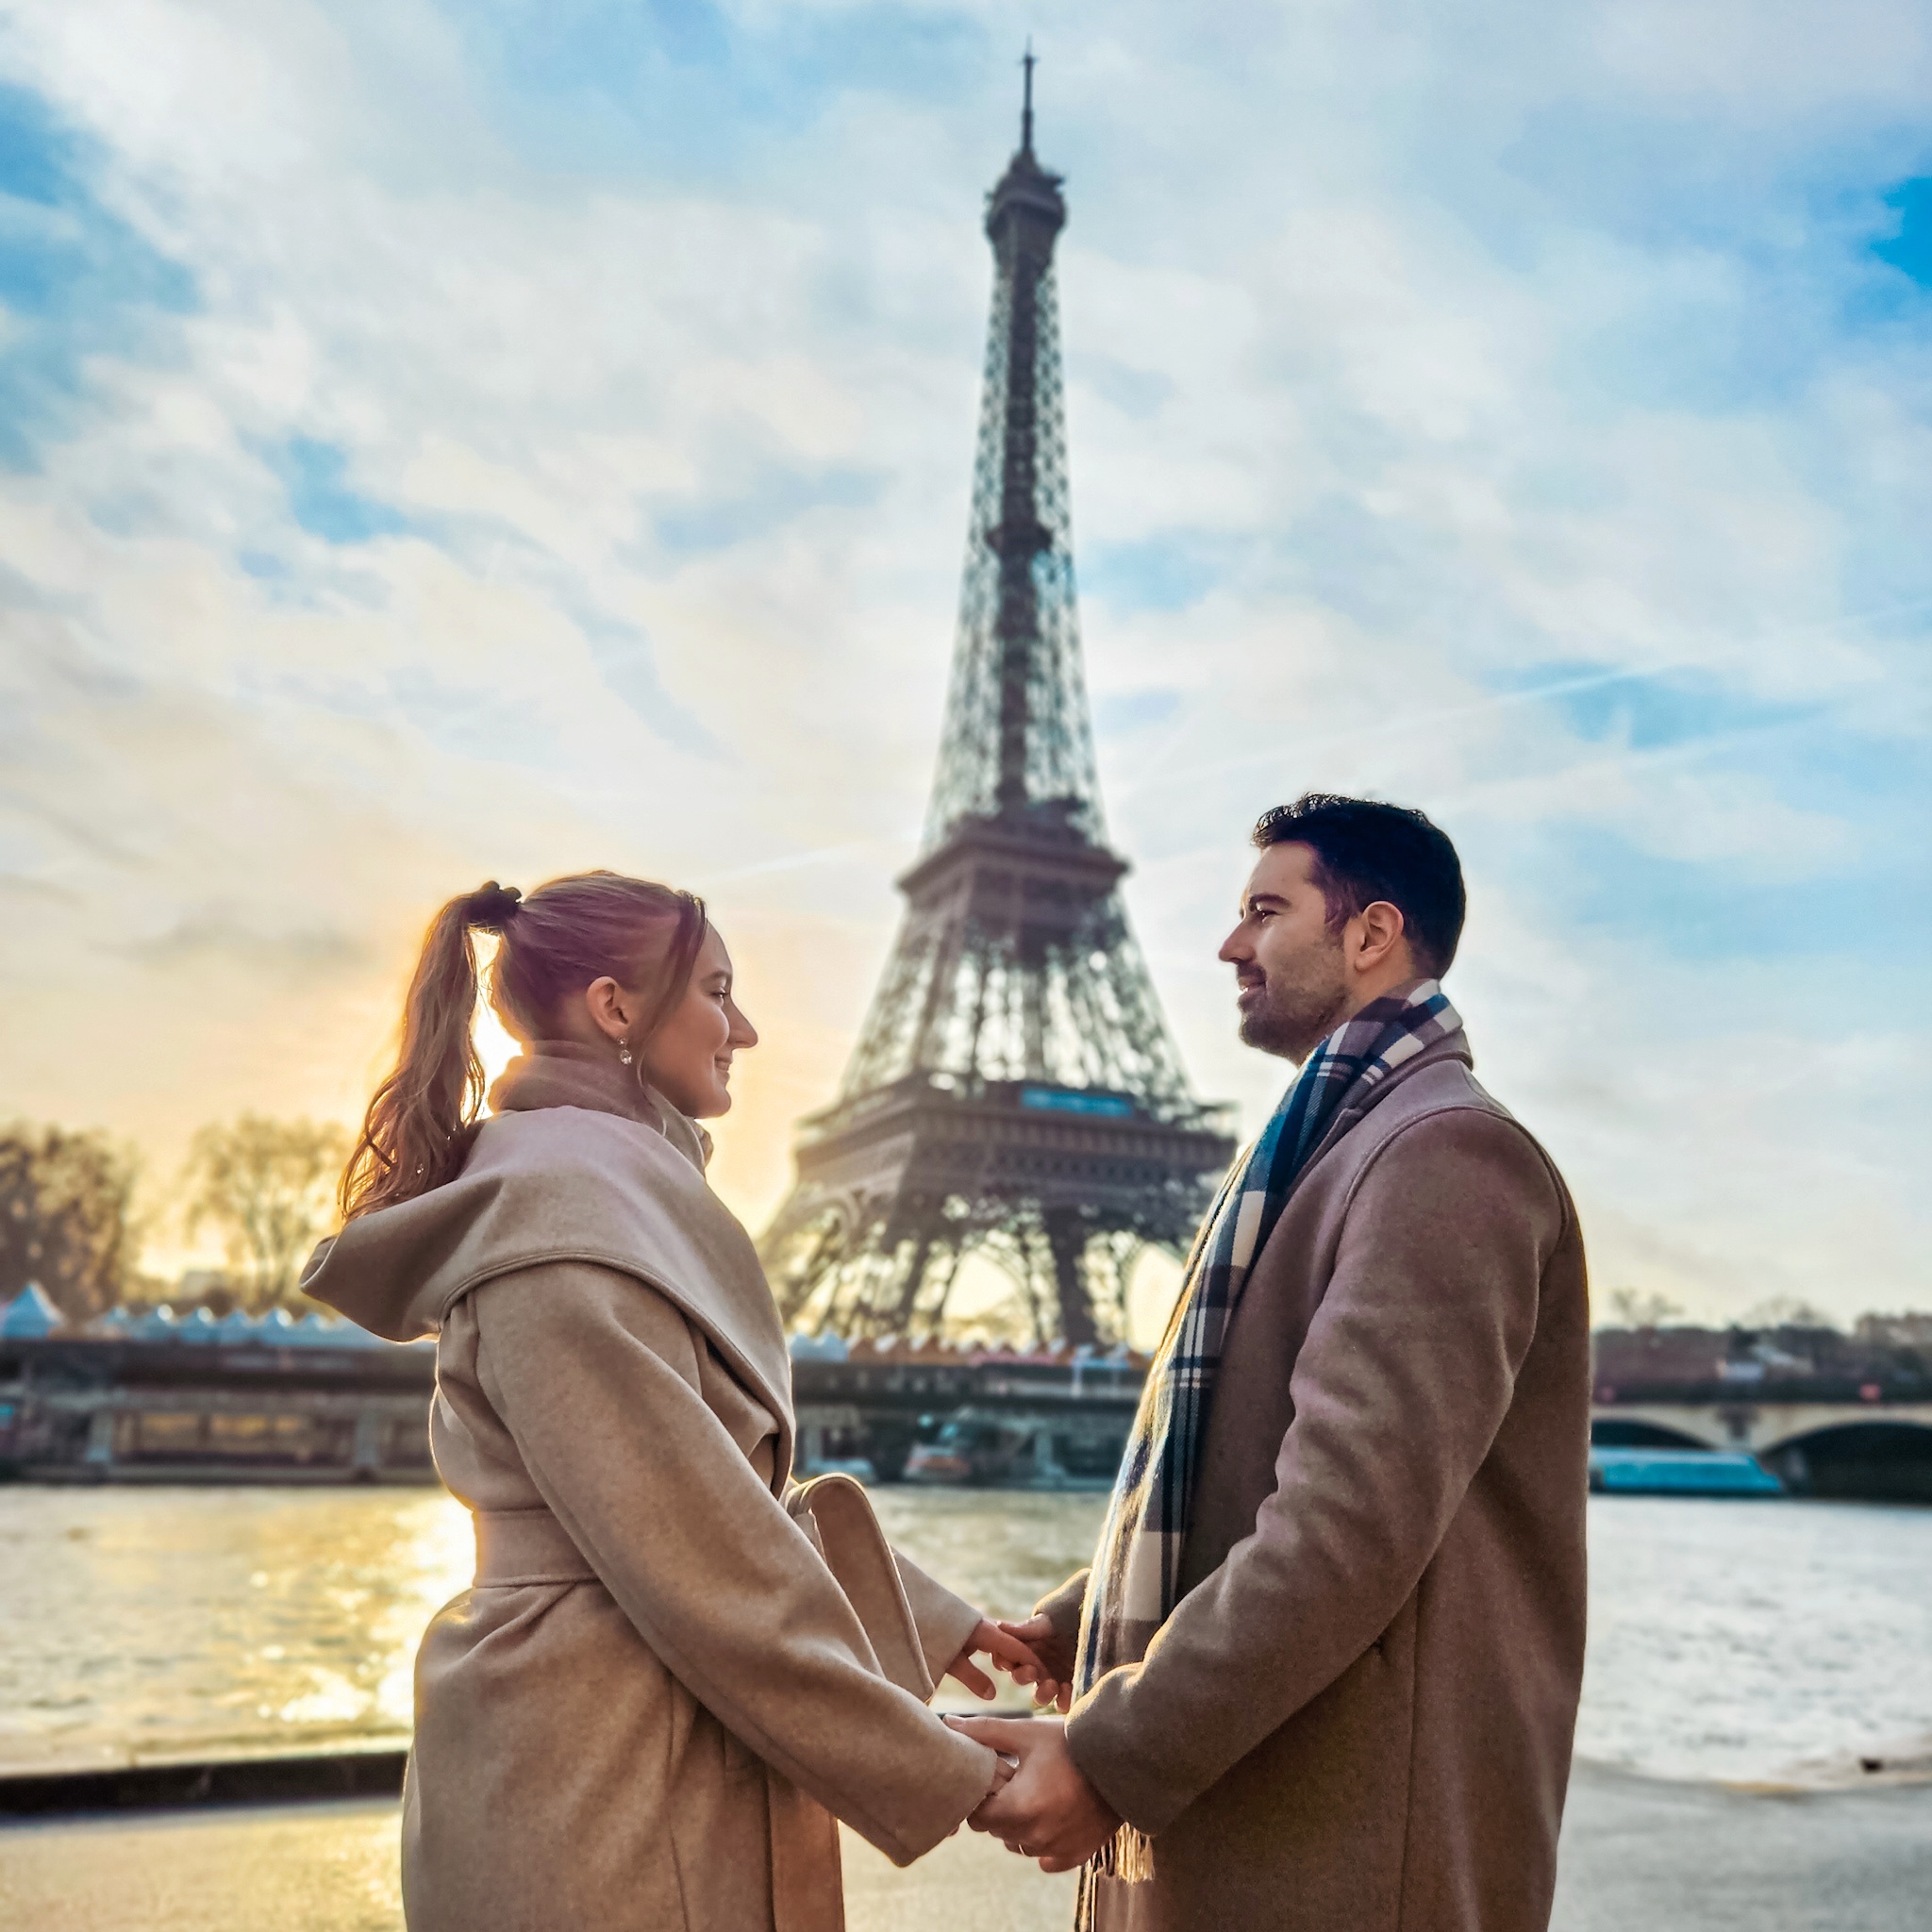 Romantic Getaway - Things to do for Couples in Paris - Eiffel Tower